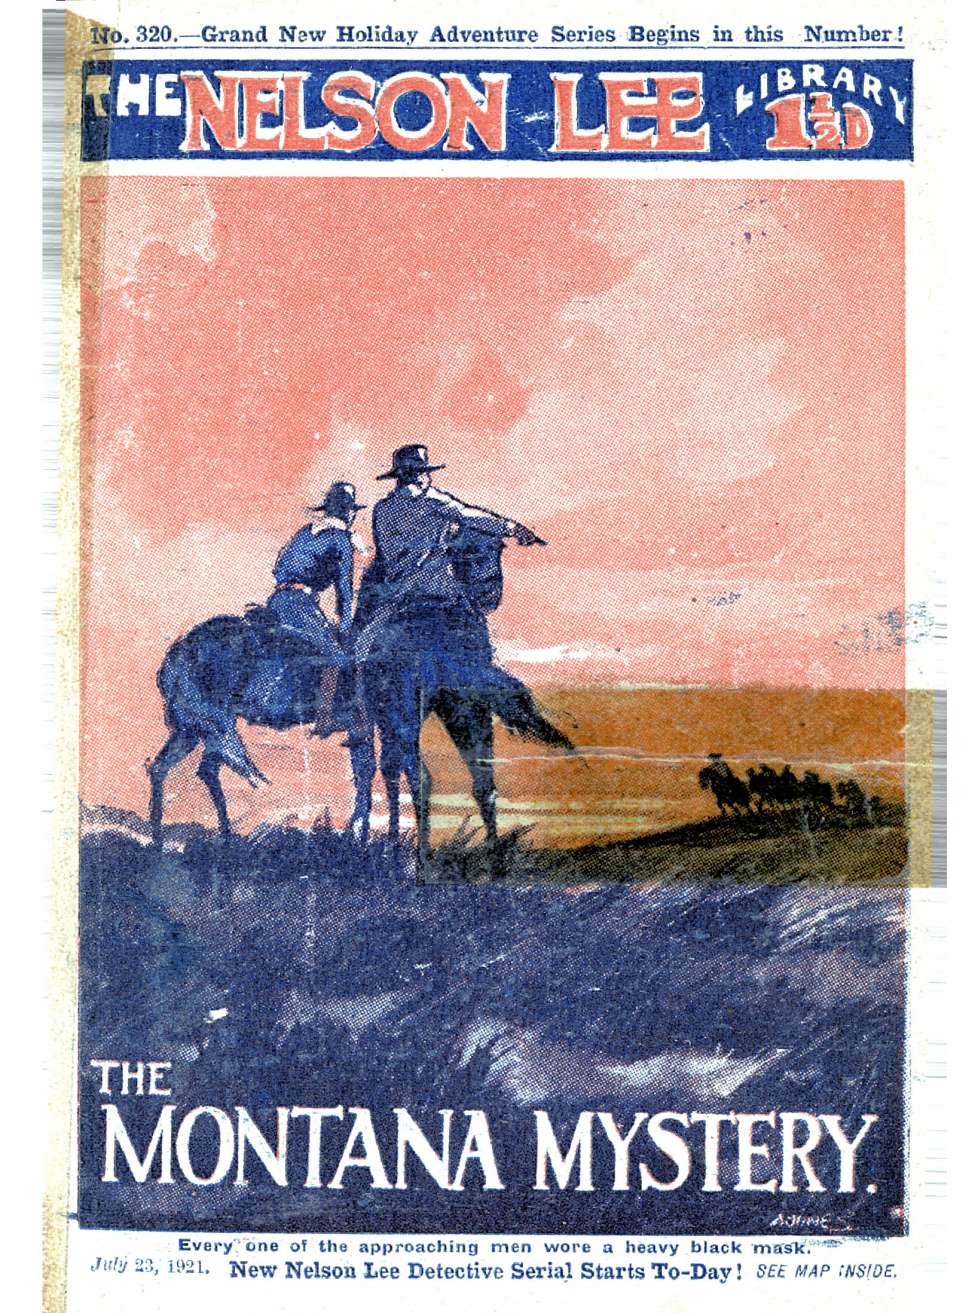 Book Cover For Nelson Lee Library s1 320 - The Montana Mystery